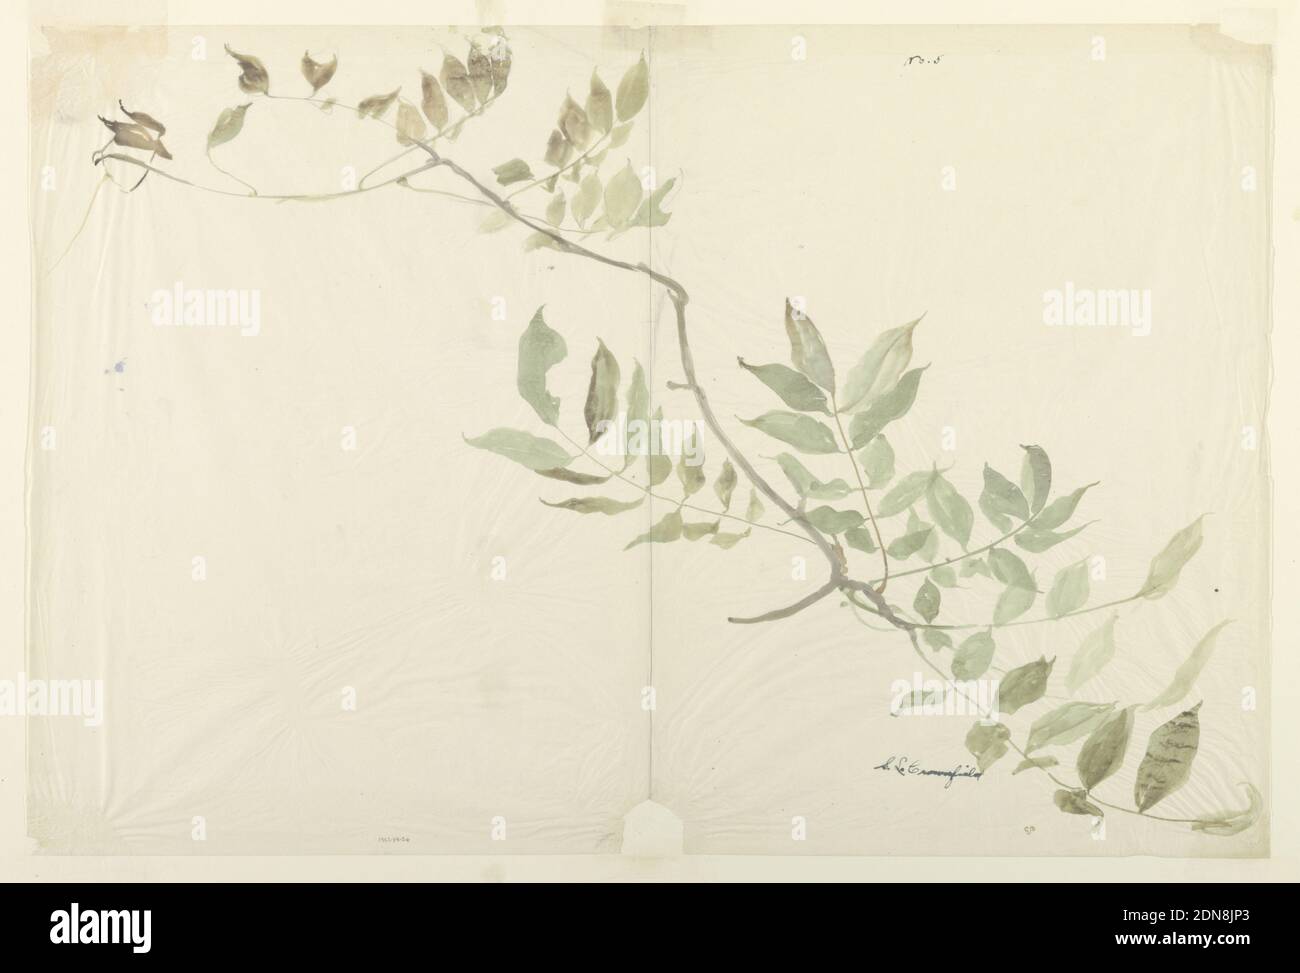 Study of Wisteria Foliage, Sophia L. Crownfield, (American, 1862–1929), Brush and watercolor on white tissue paper, Horizontal sheet depicting a single branch of wisteria drawn diagonally across the sheet., USA, early 20th century, nature studies, Drawing Stock Photo